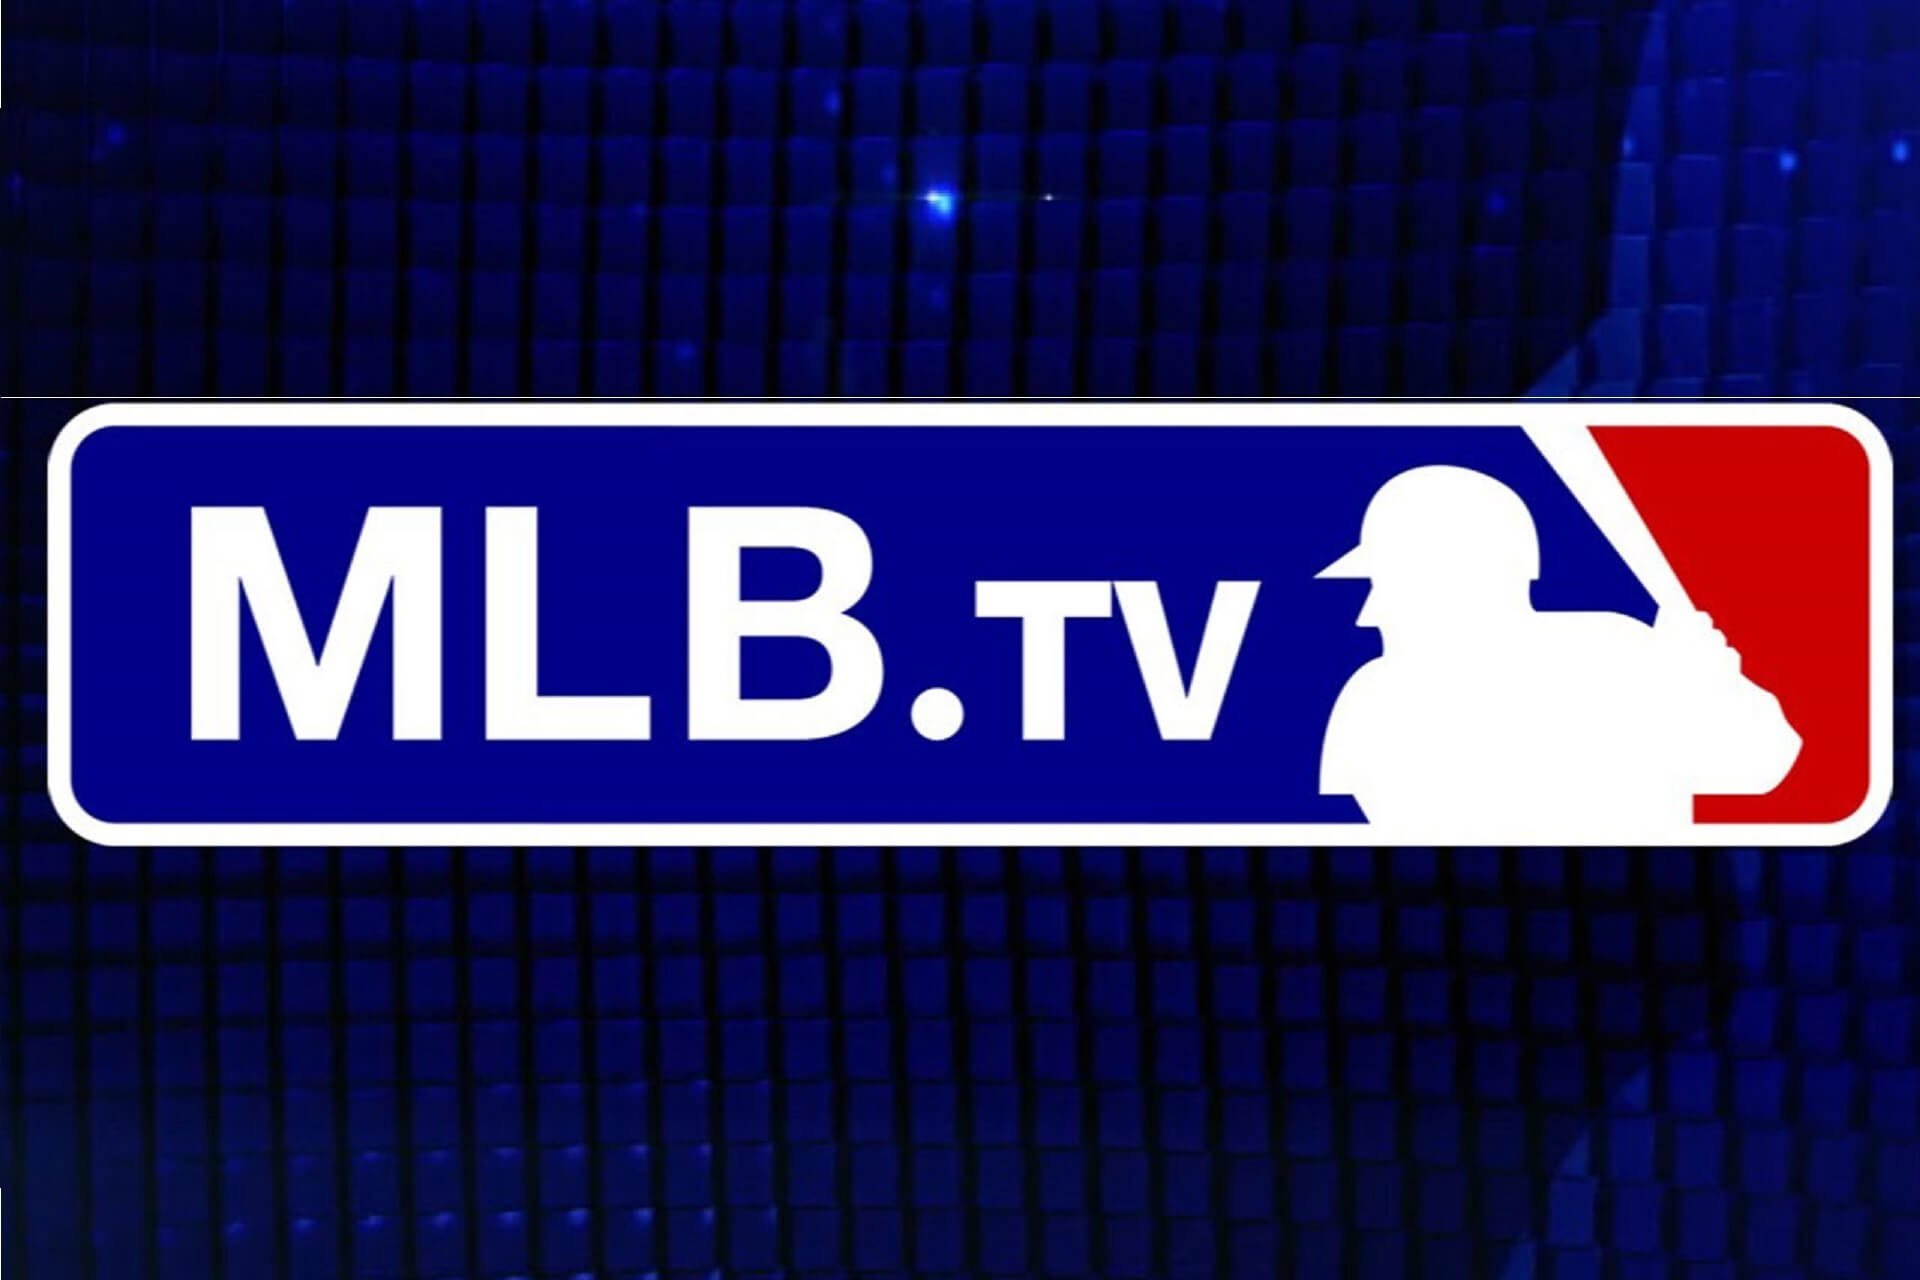 VPN not working with MLB.tv